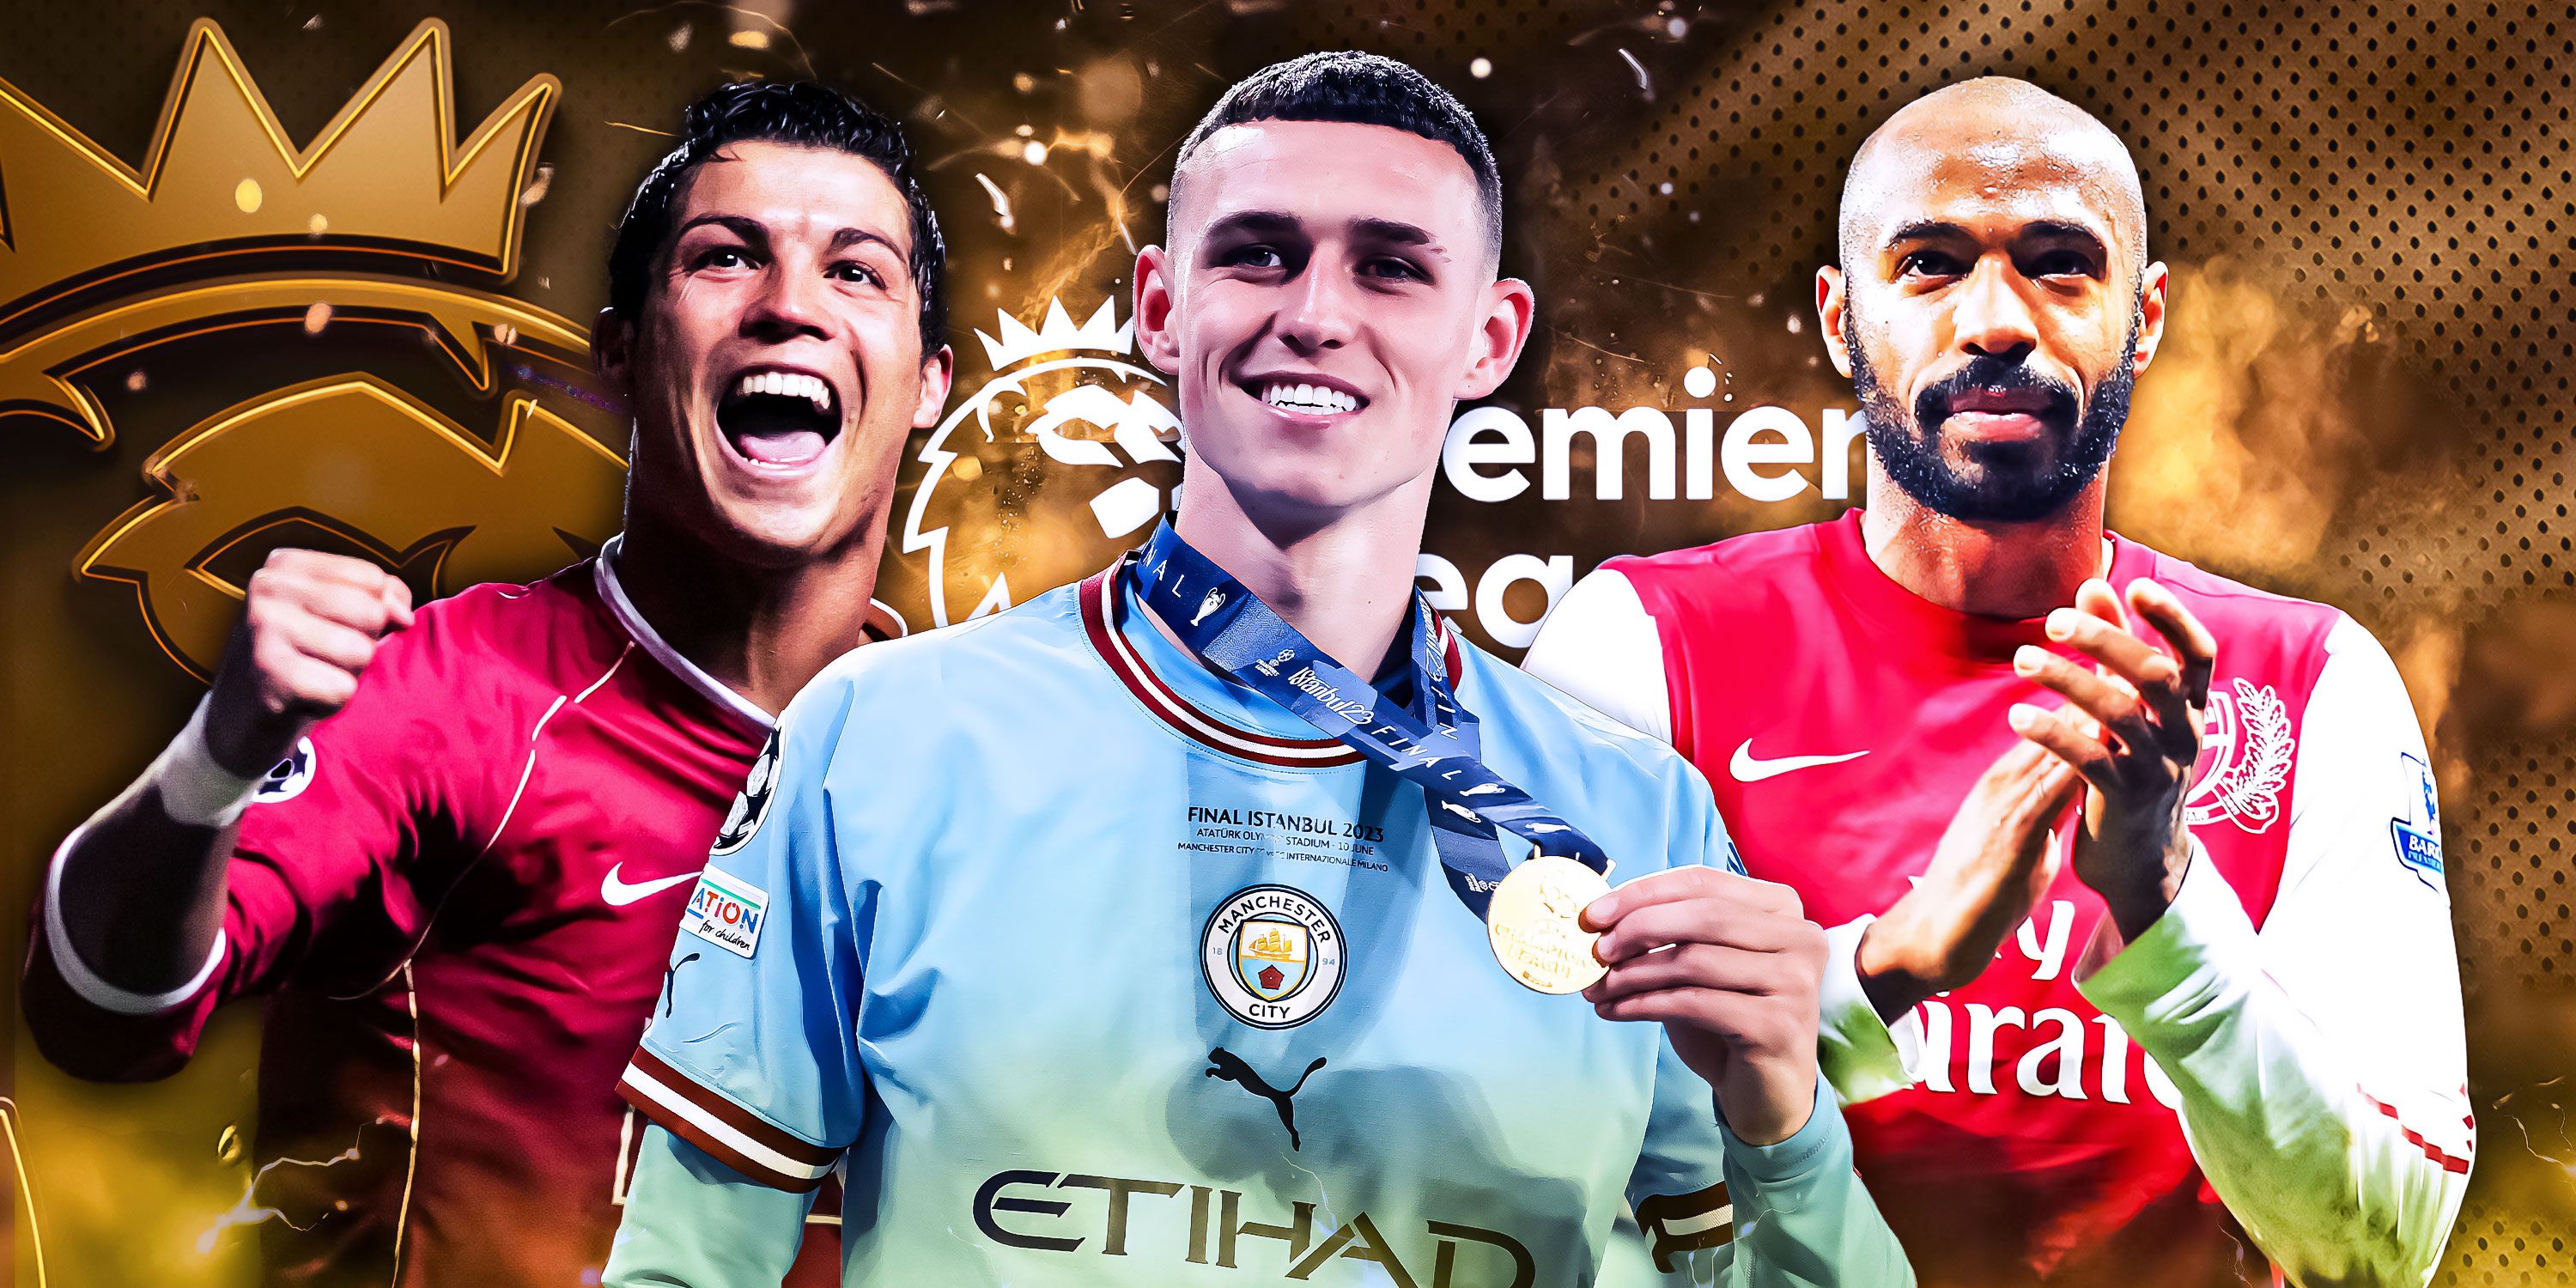 Featured Image including Manchester City's Phil Foden, Manchester United's Cristiano Ronaldo and Arsenal's Thierry Henry.